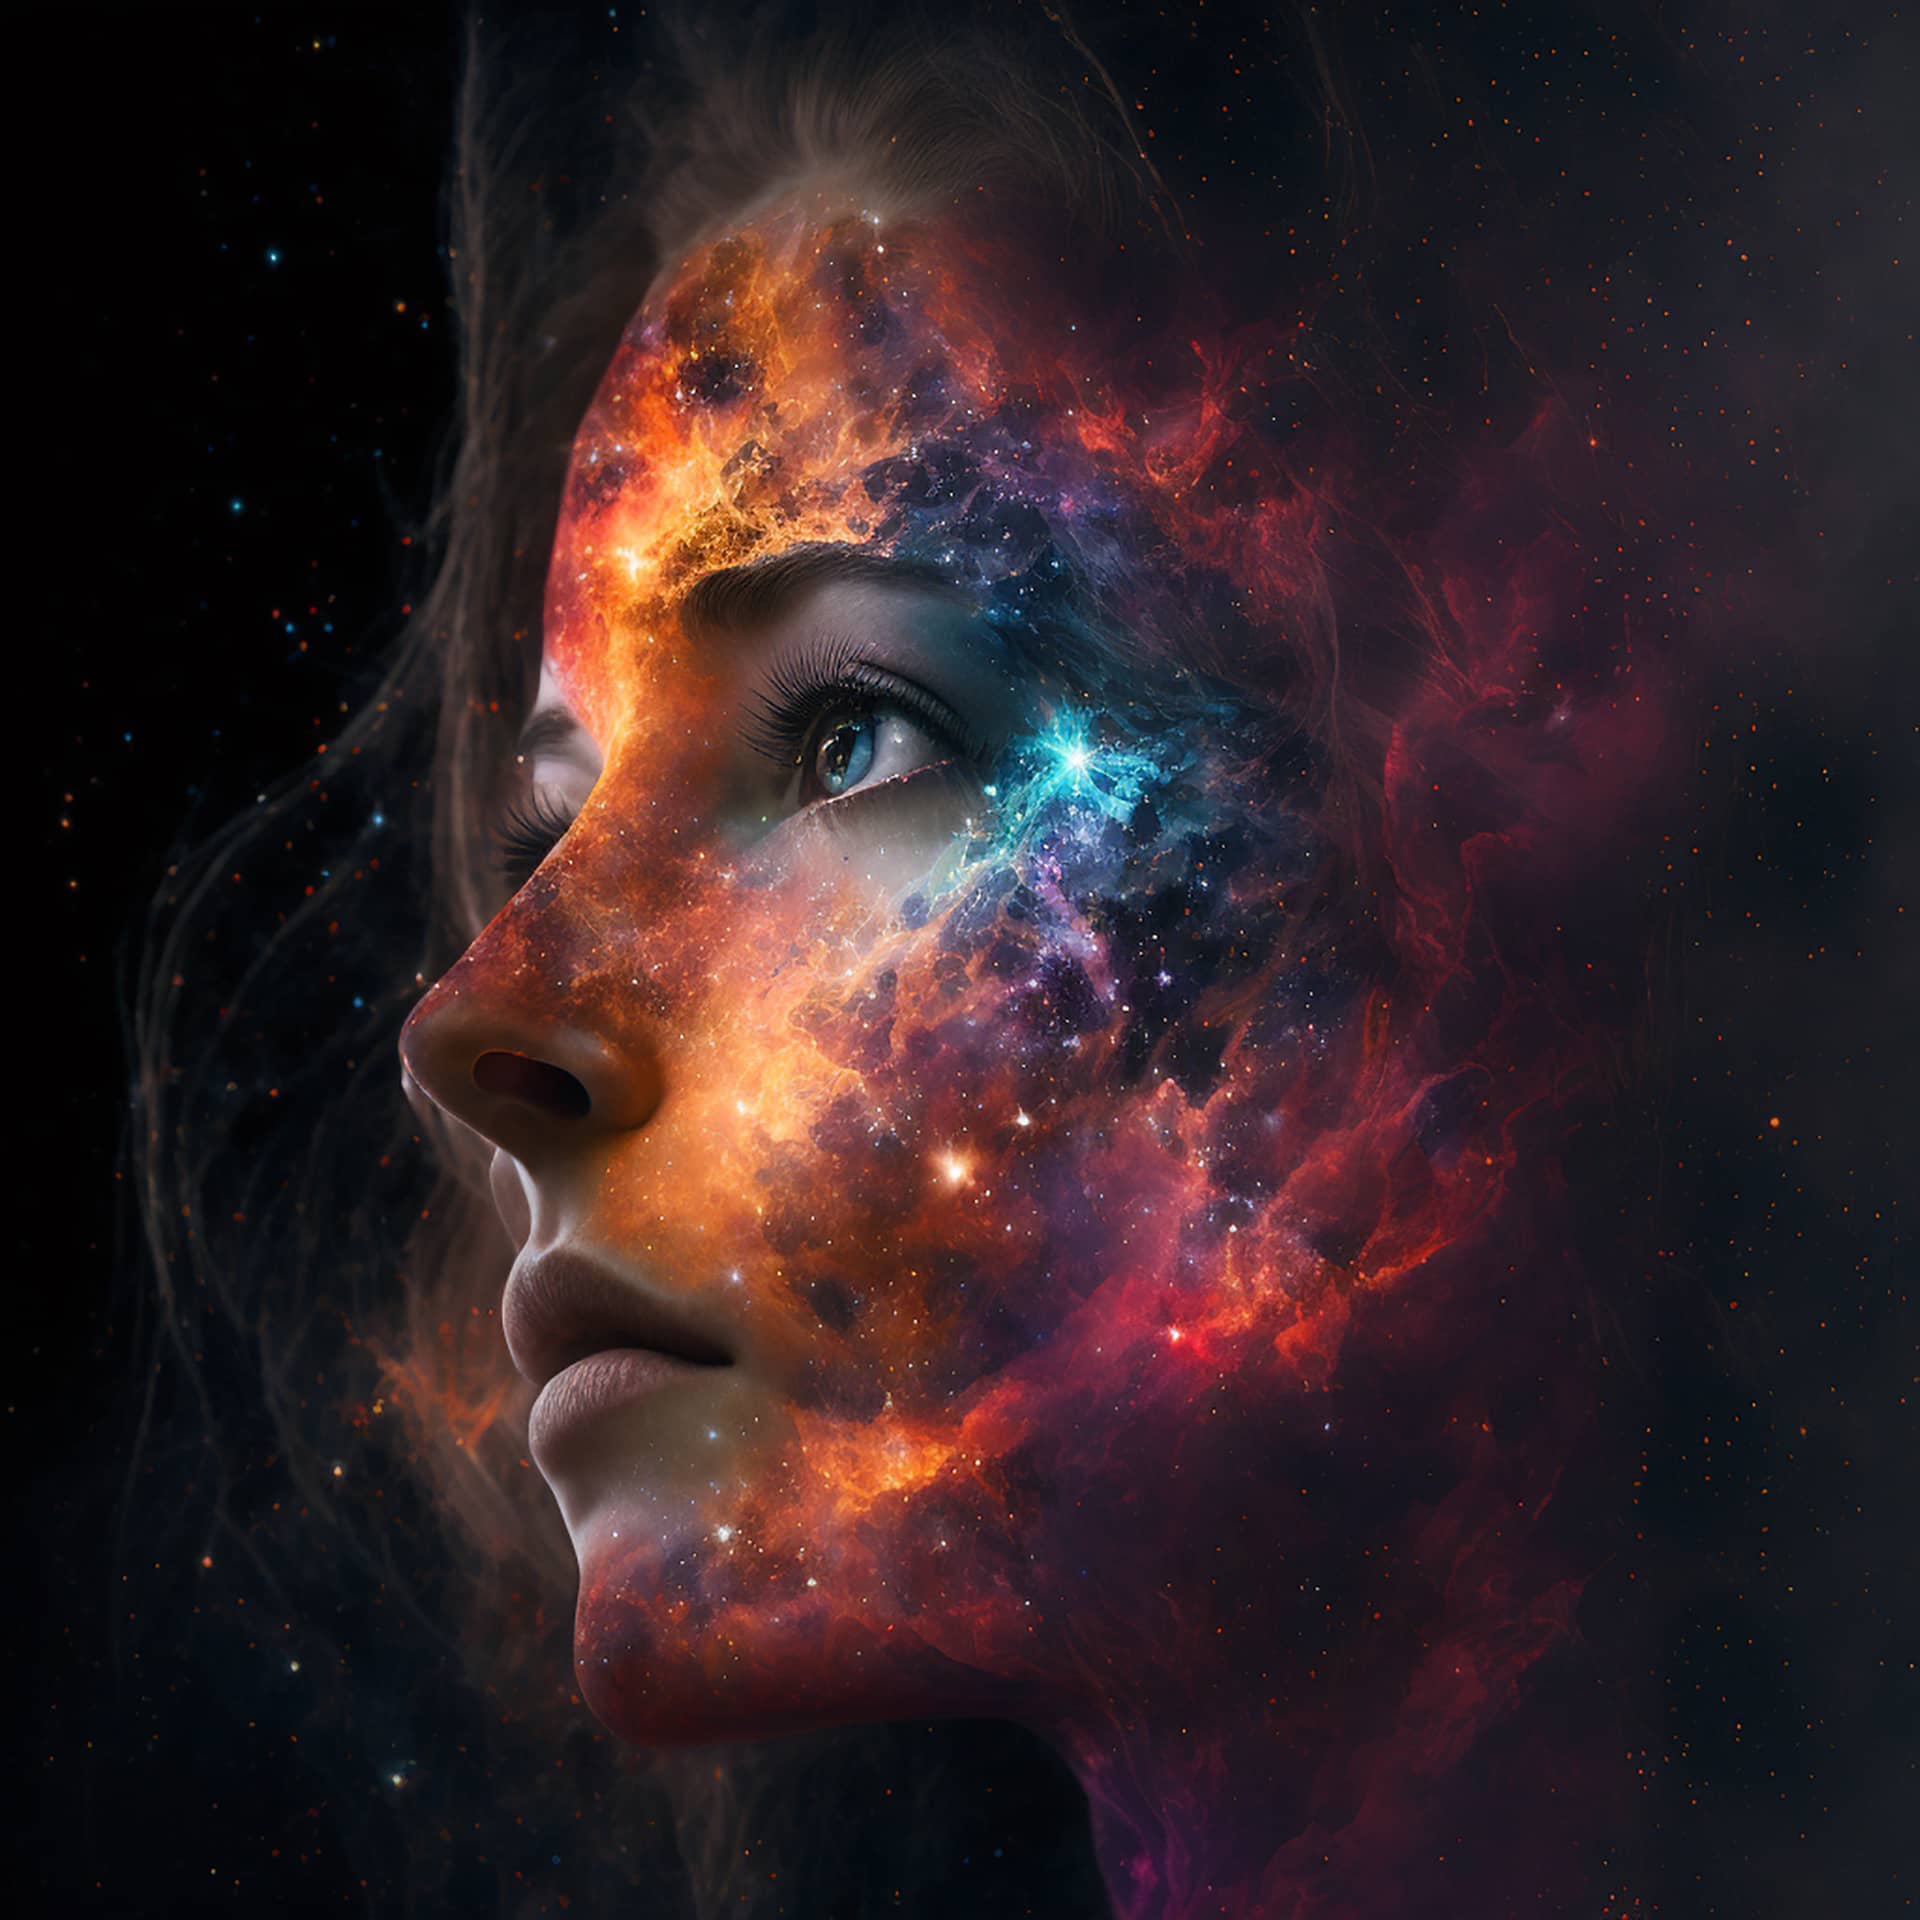 Cool images for profile fantasy art young galaxy nebula woman